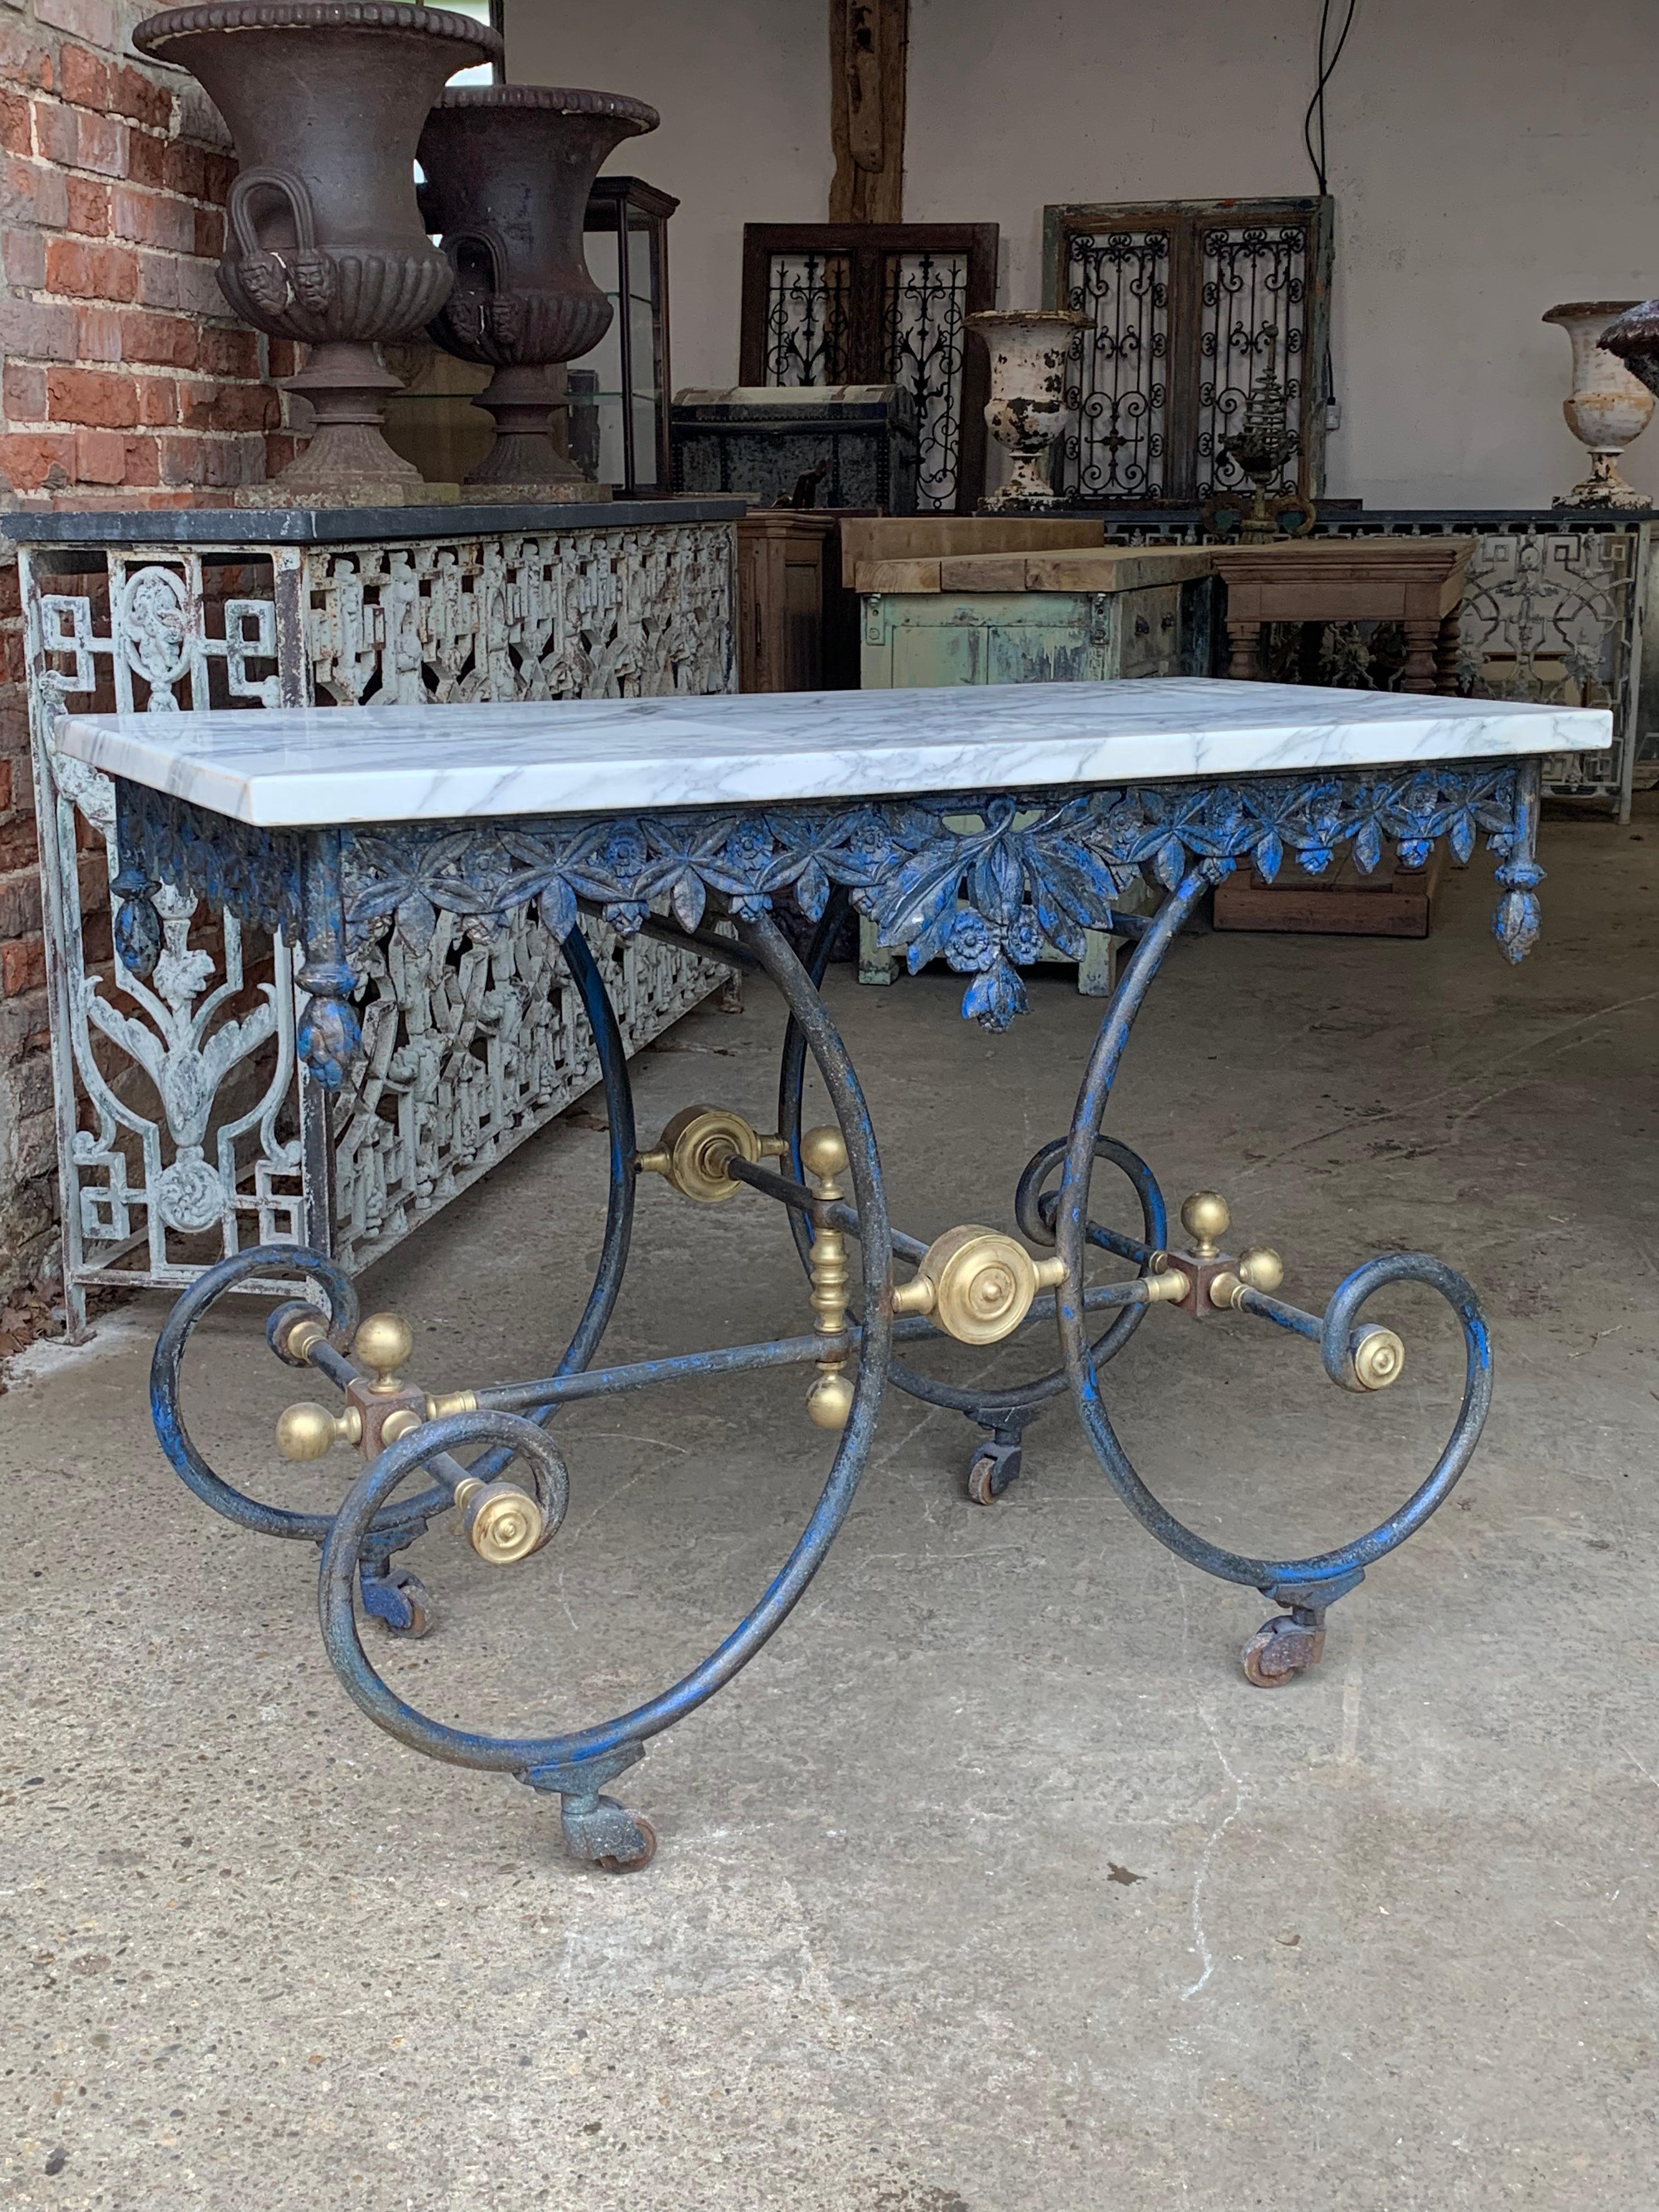 A beautiful late 19th century French patisserie table with lovely old worn paint and solid marble top. It has a wonderful decorative iron frieze around the top which is all complete and undamaged.

This type of table was used to display cakes in the